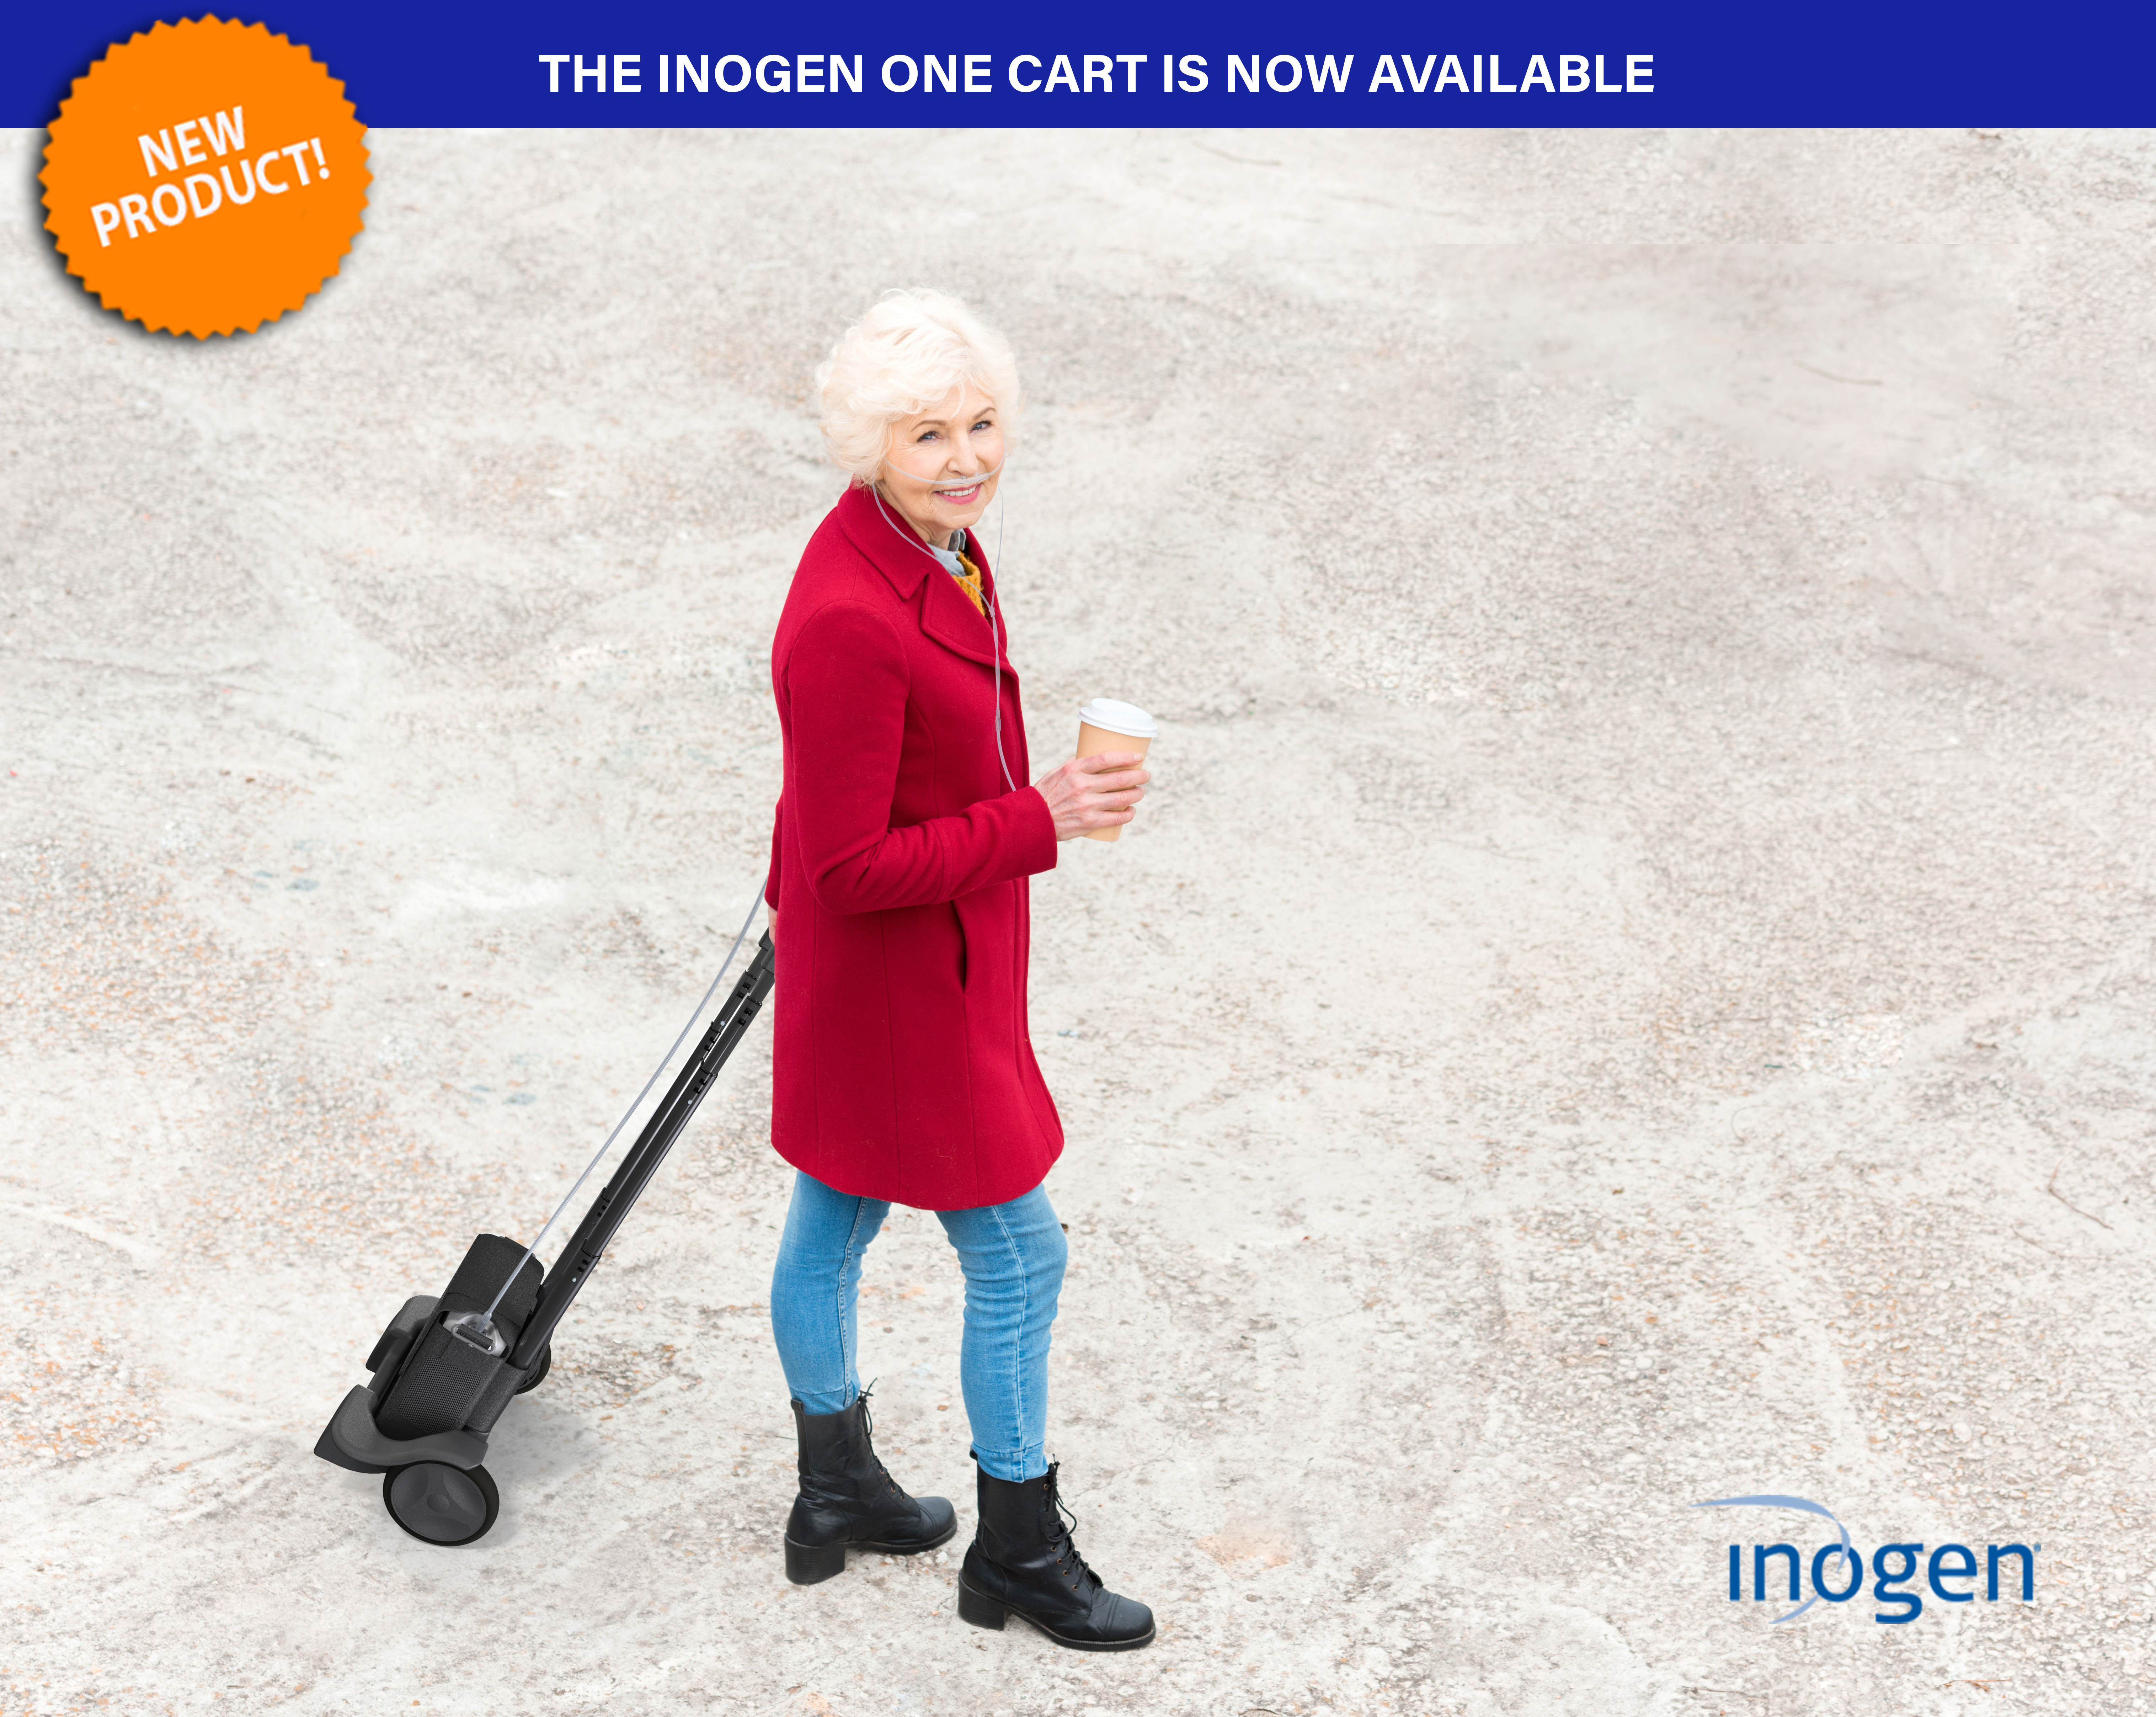 Woman pull an Inogen One Cart. New Product! The Inogen One Cart is now available.